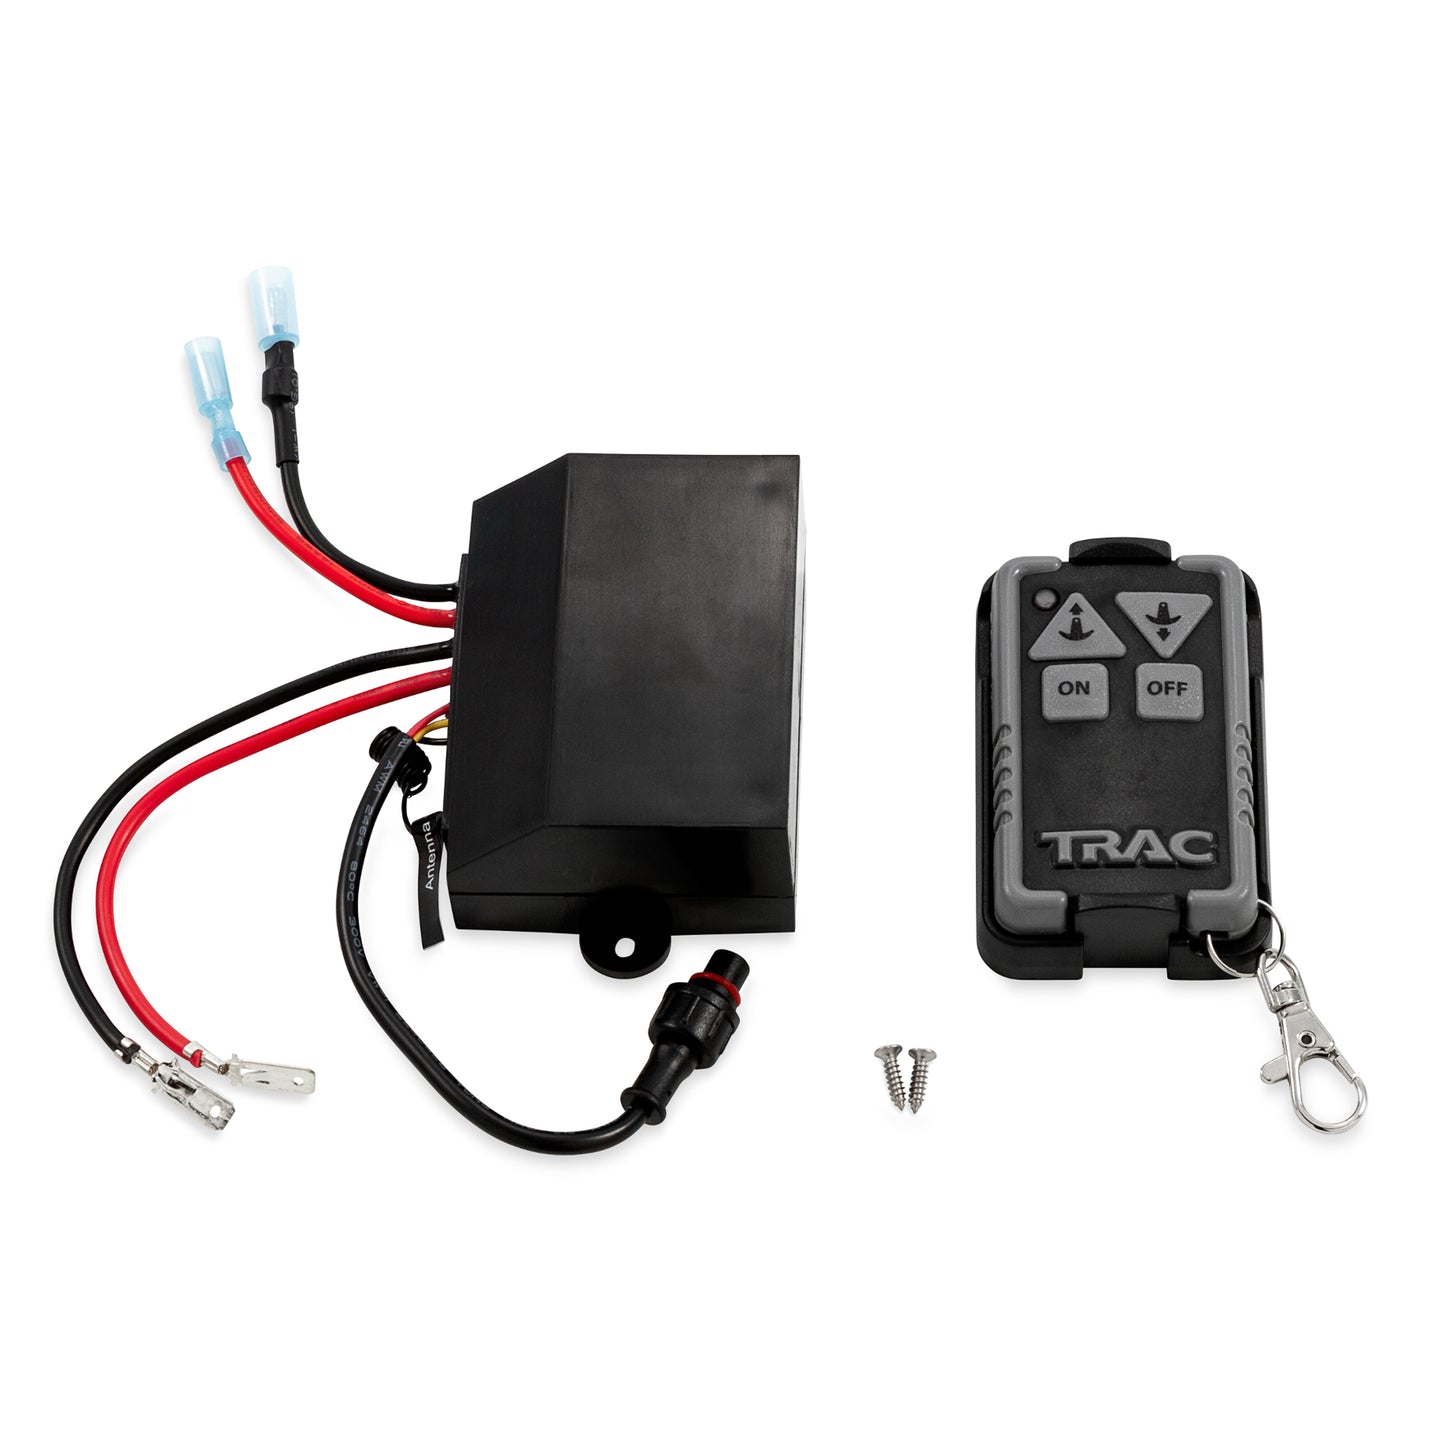 TRAC Outdoors G3 Anchor Winch Wireless Remote Kit